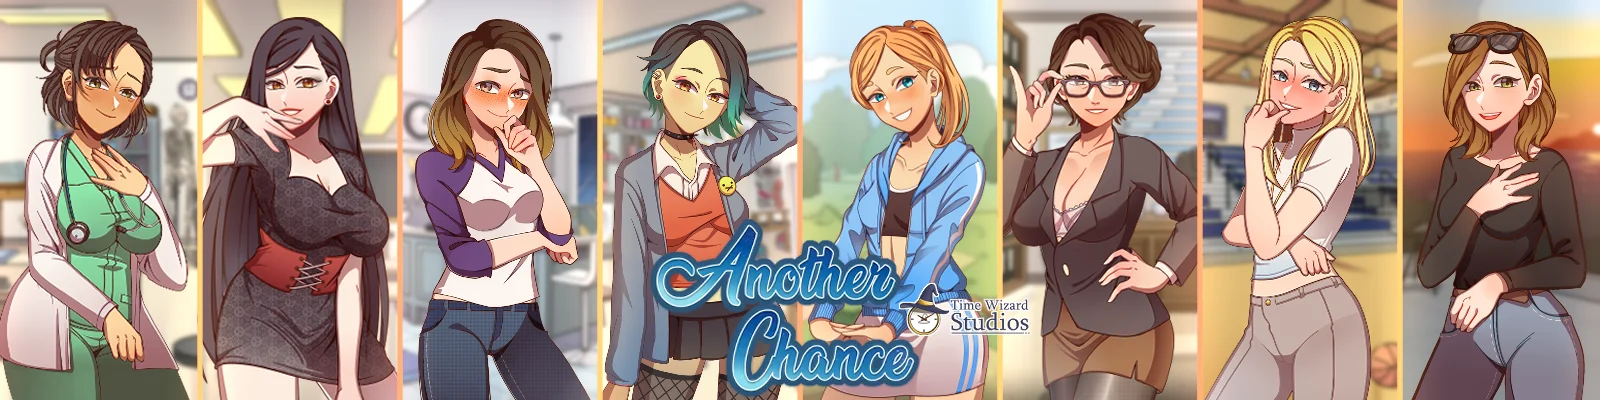 Another chance game banner